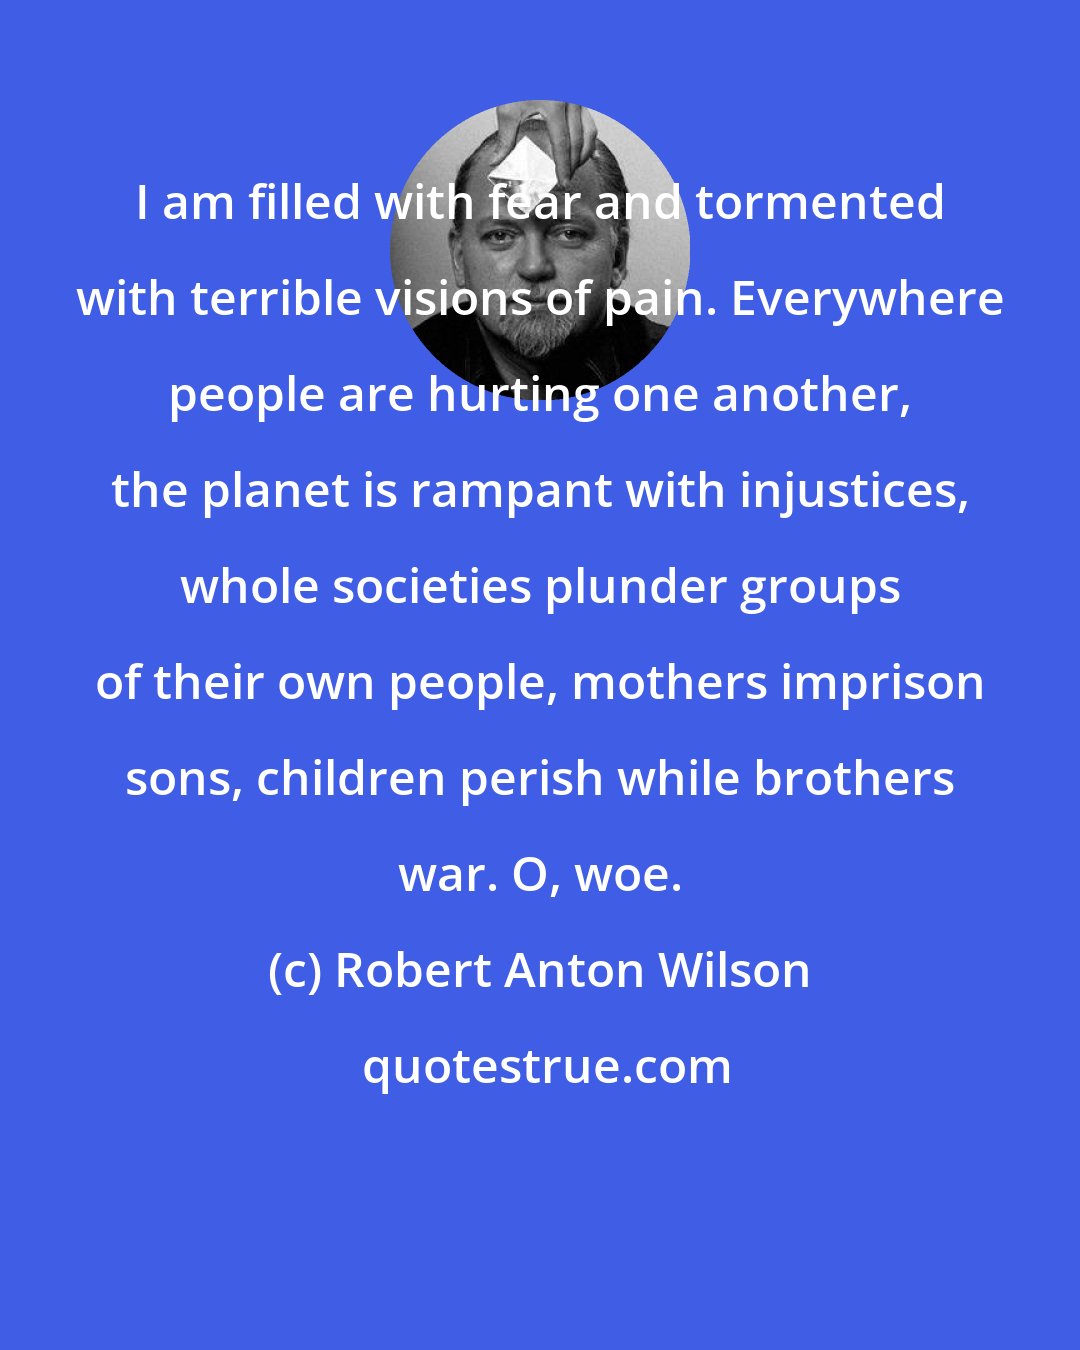 Robert Anton Wilson: I am filled with fear and tormented with terrible visions of pain. Everywhere people are hurting one another, the planet is rampant with injustices, whole societies plunder groups of their own people, mothers imprison sons, children perish while brothers war. O, woe.